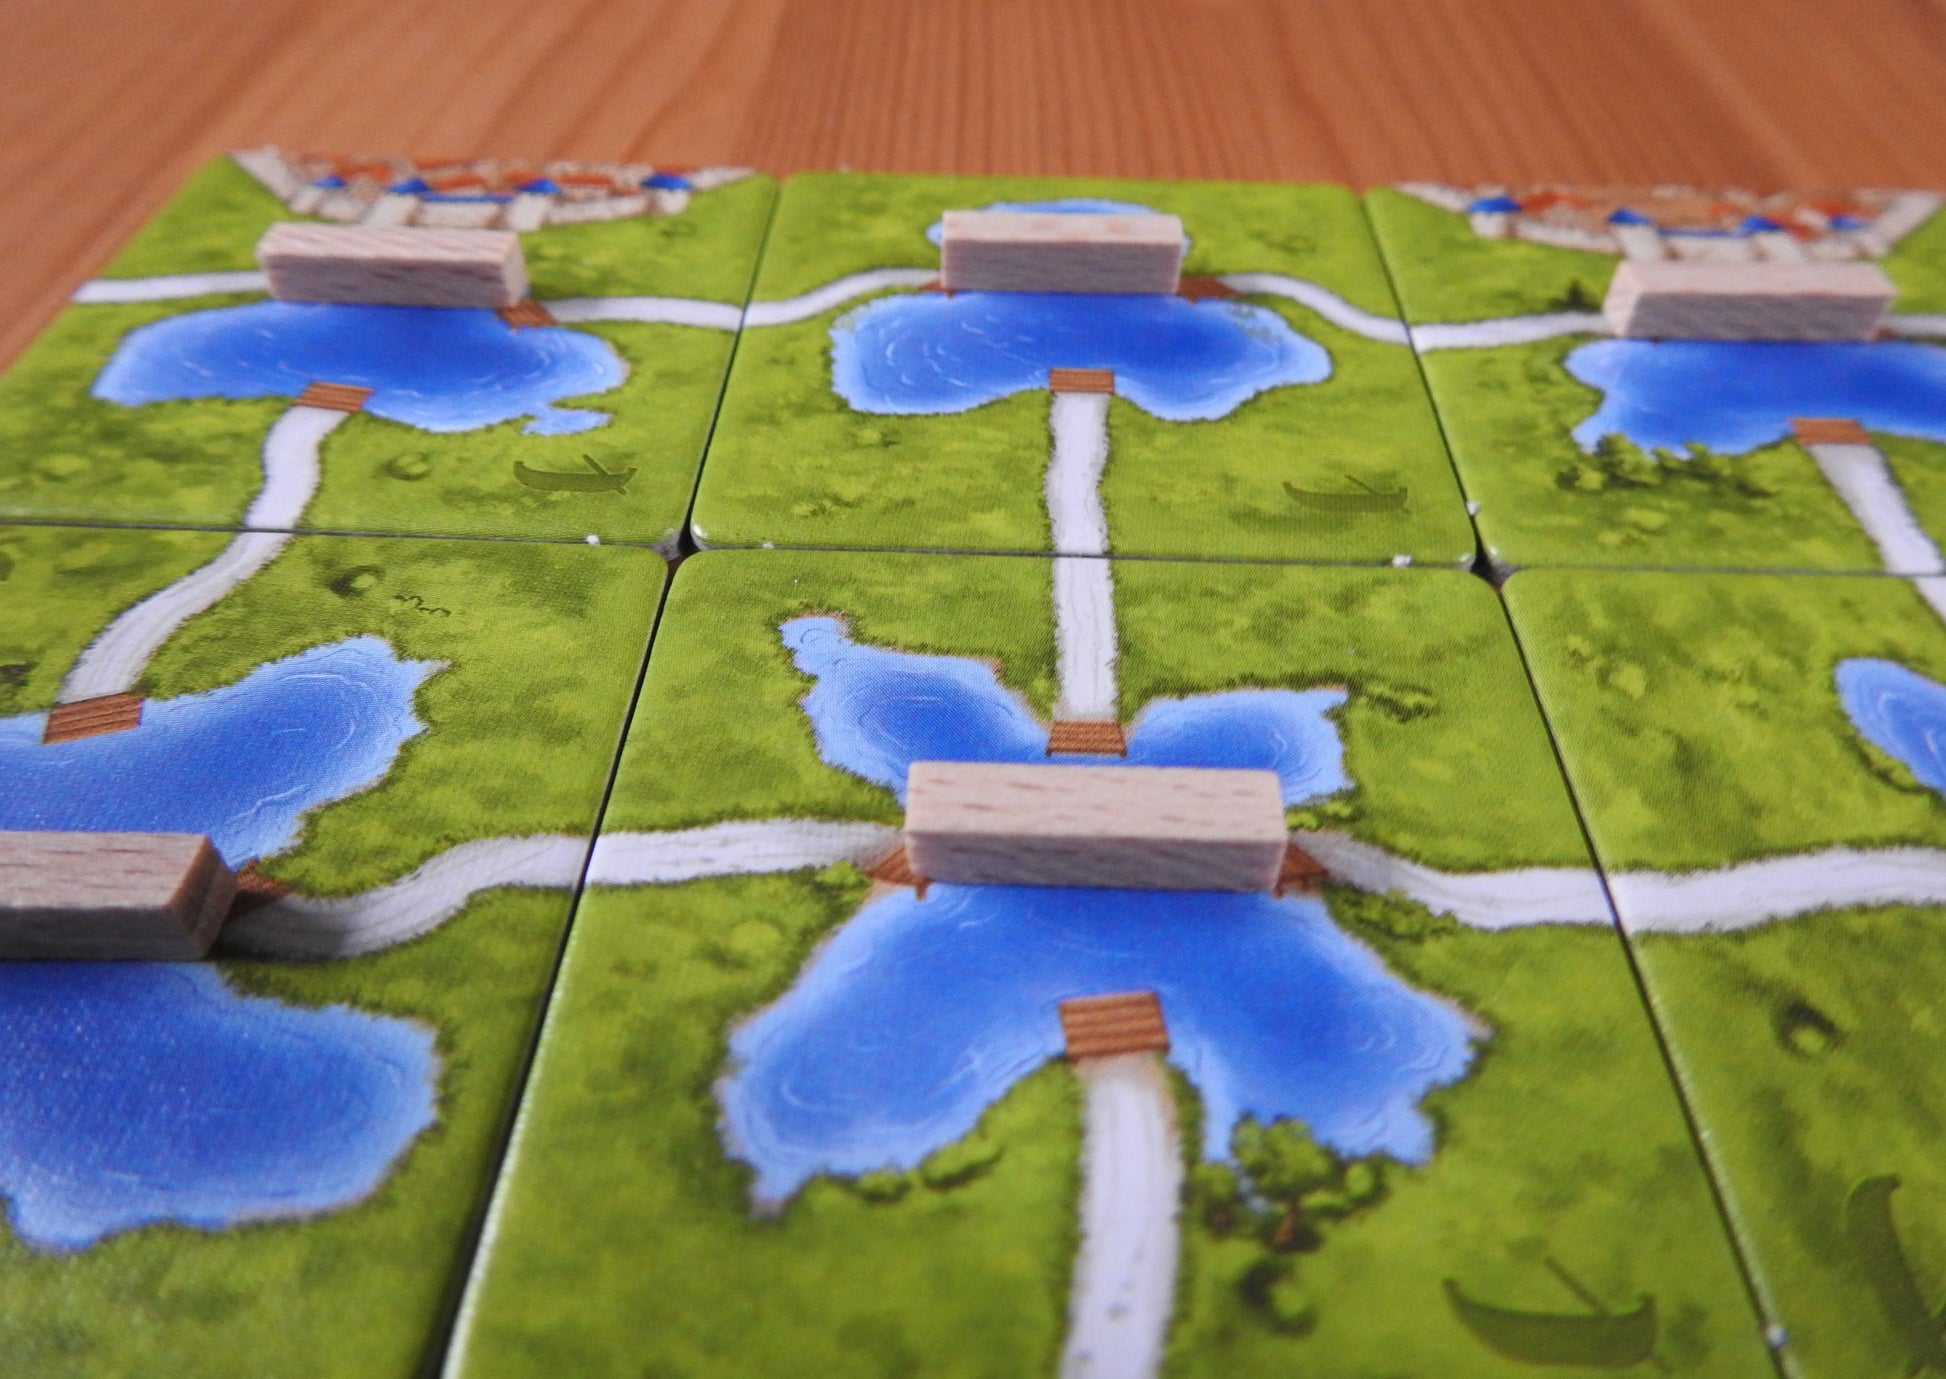 A closer view of the wooden ferry pieces on the tiles of this Carcassonne Ferries expansion.